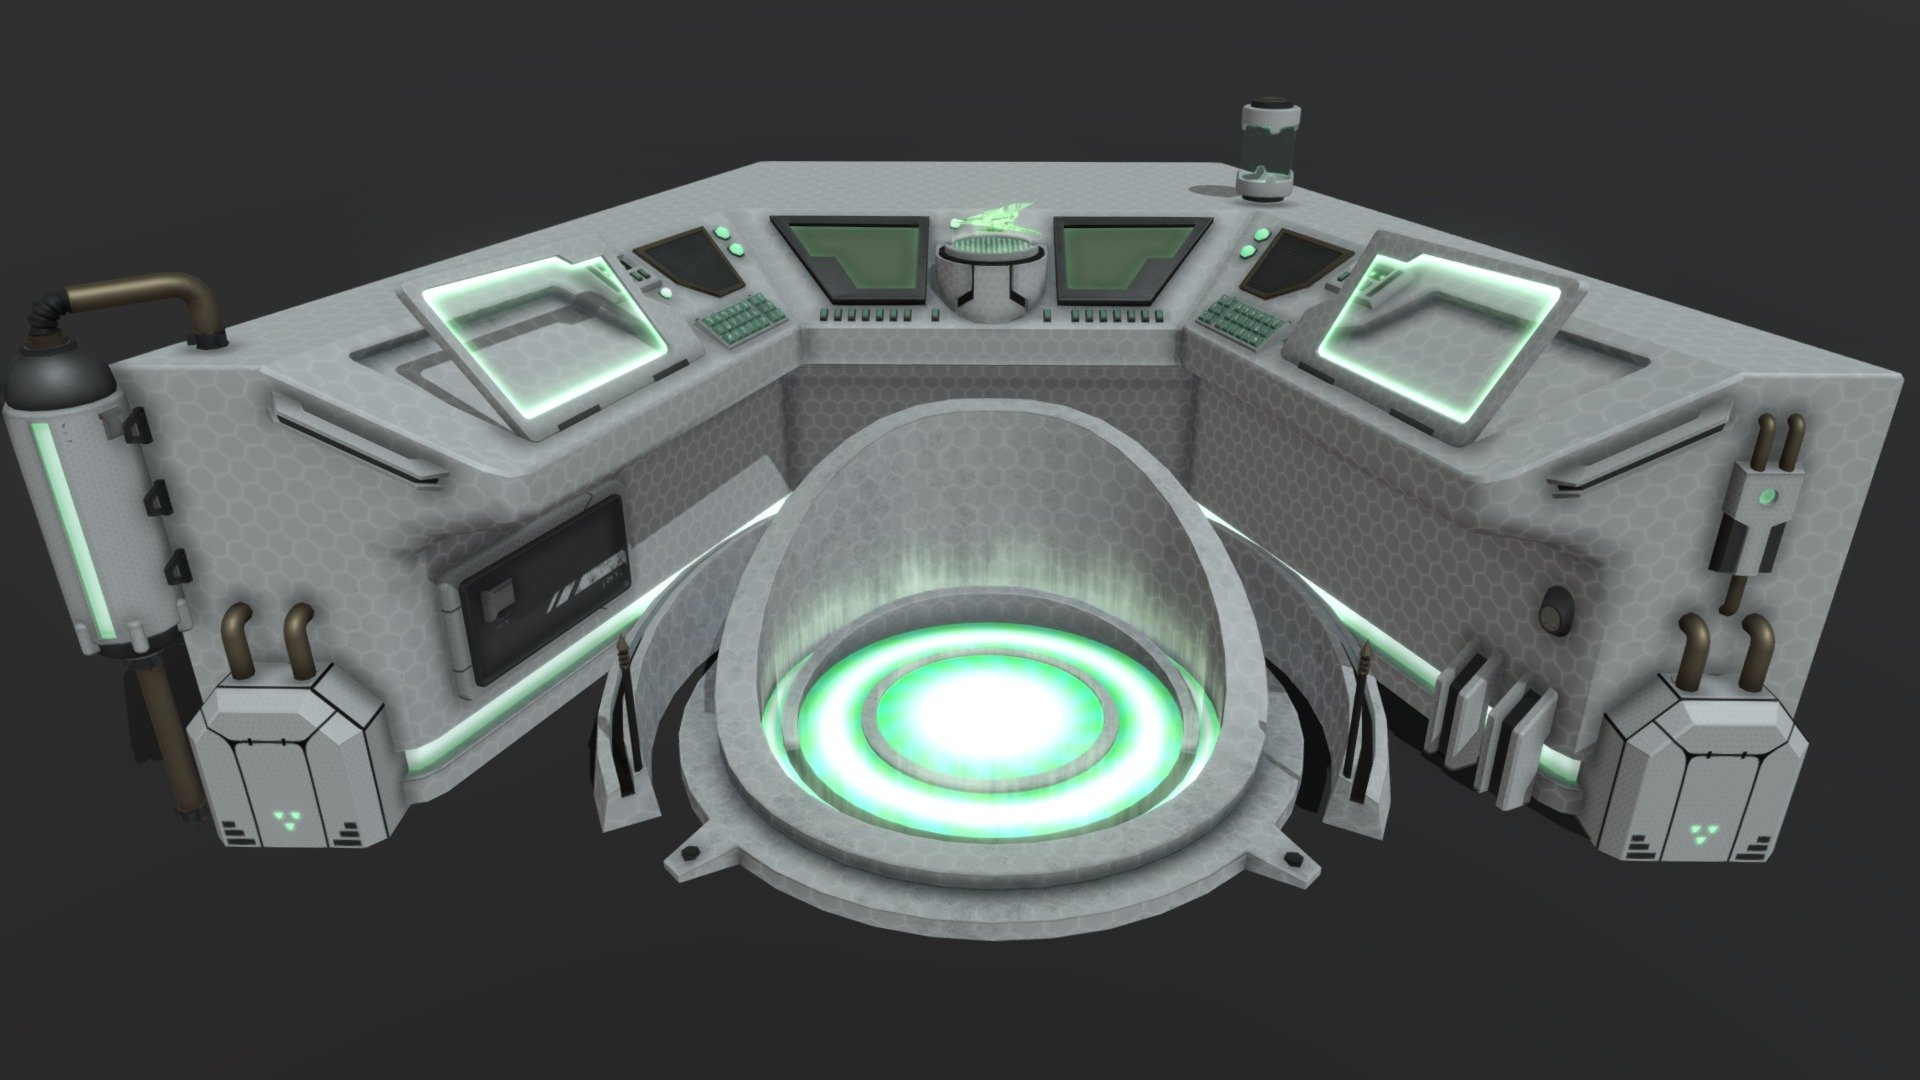 This is an asset found within the Main Spaceship Hub in a game I'm working on called Solar Explorer (Working Title).  In this scene it has been decorated with objects from my sci-fi kitbash, similar to the way it's decorated in the game 3d model